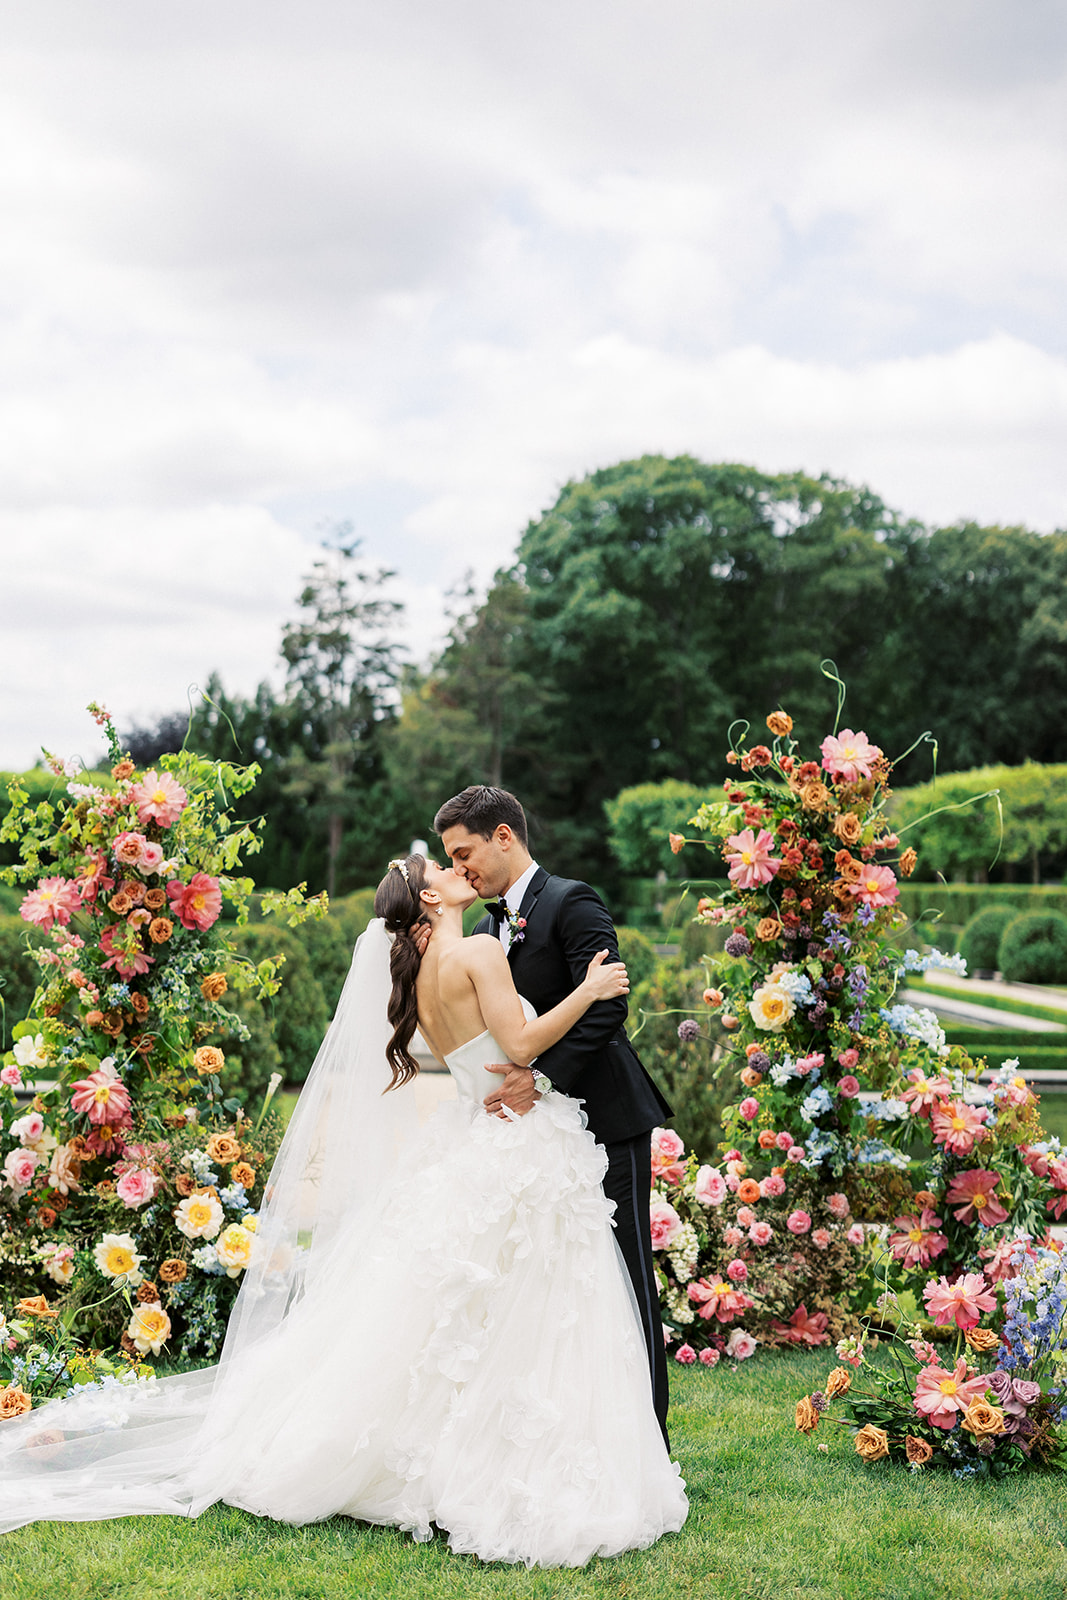 Newlyweds kiss among a large display of colorful florals during a wedding ceremony